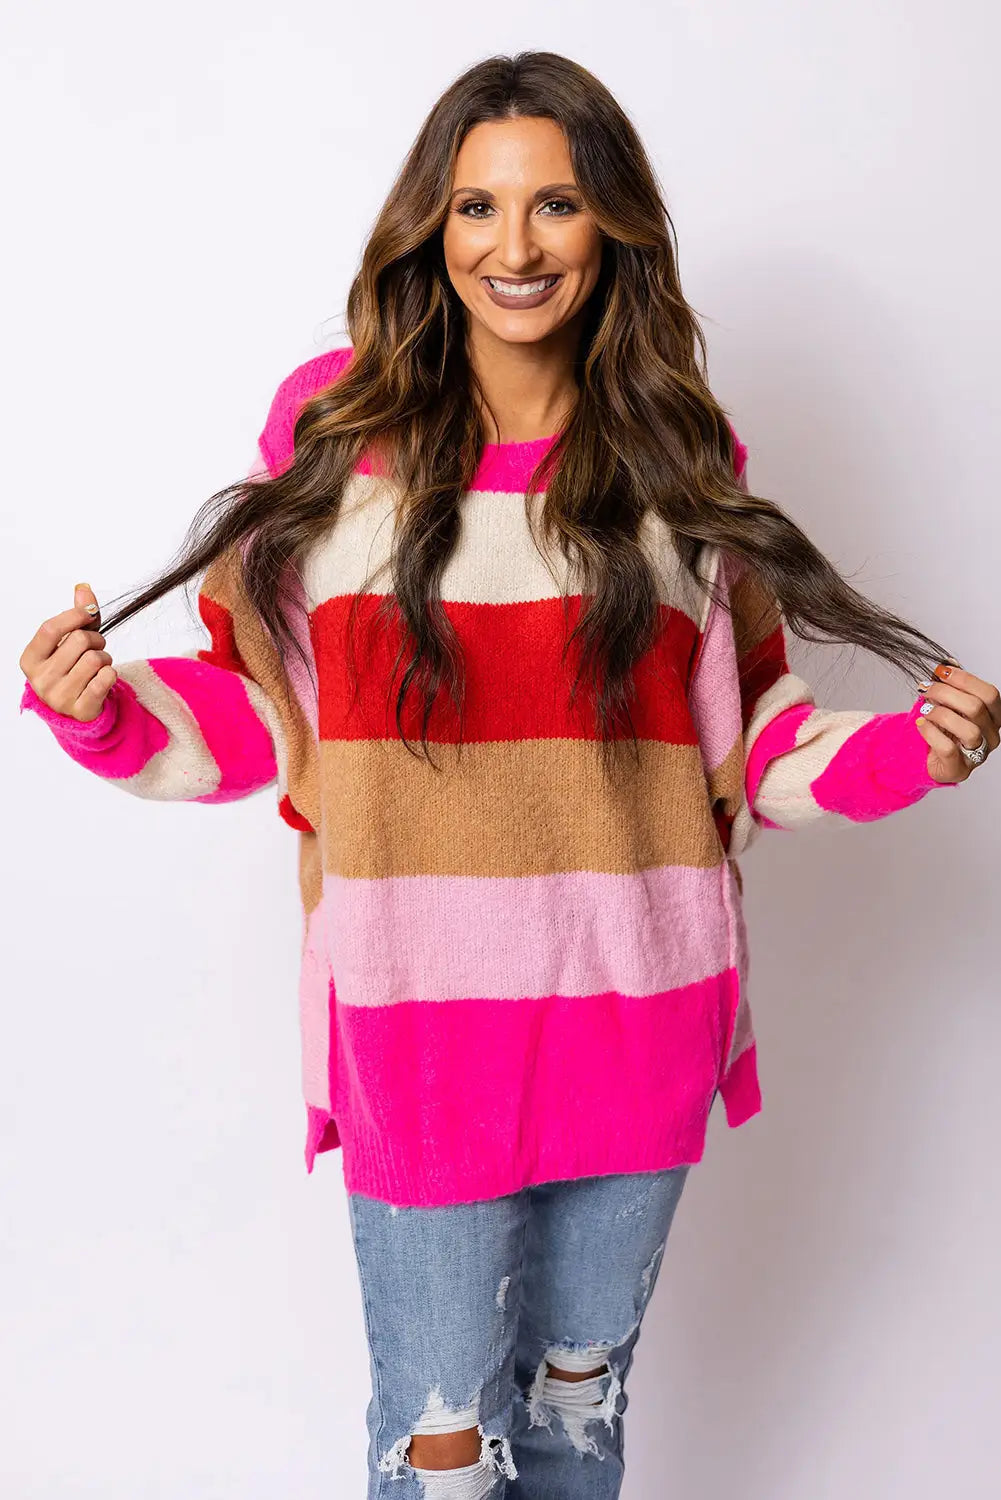 Red mix horizon stripes dolman sleeve sweater - sweaters & cardigans